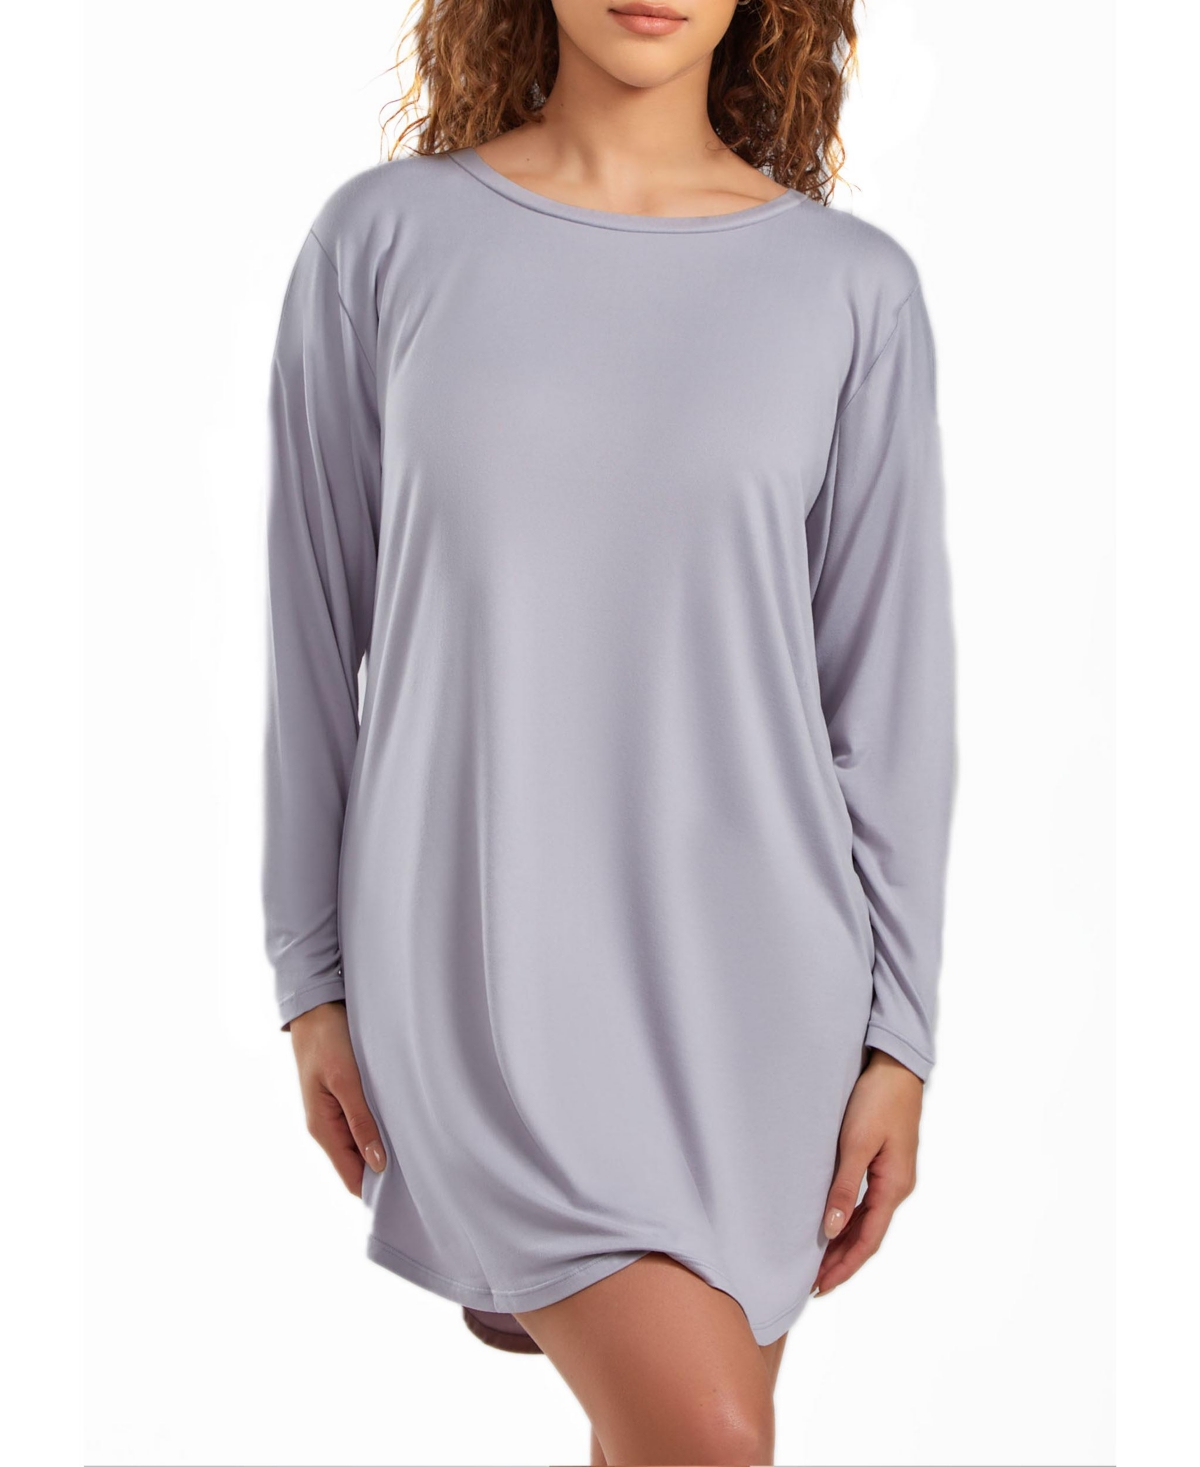 Icollection Jewel Modal Plus Size Sleep Shirt Or Dress In Ultra Soft And Cozy Lounge Style In Light Gray